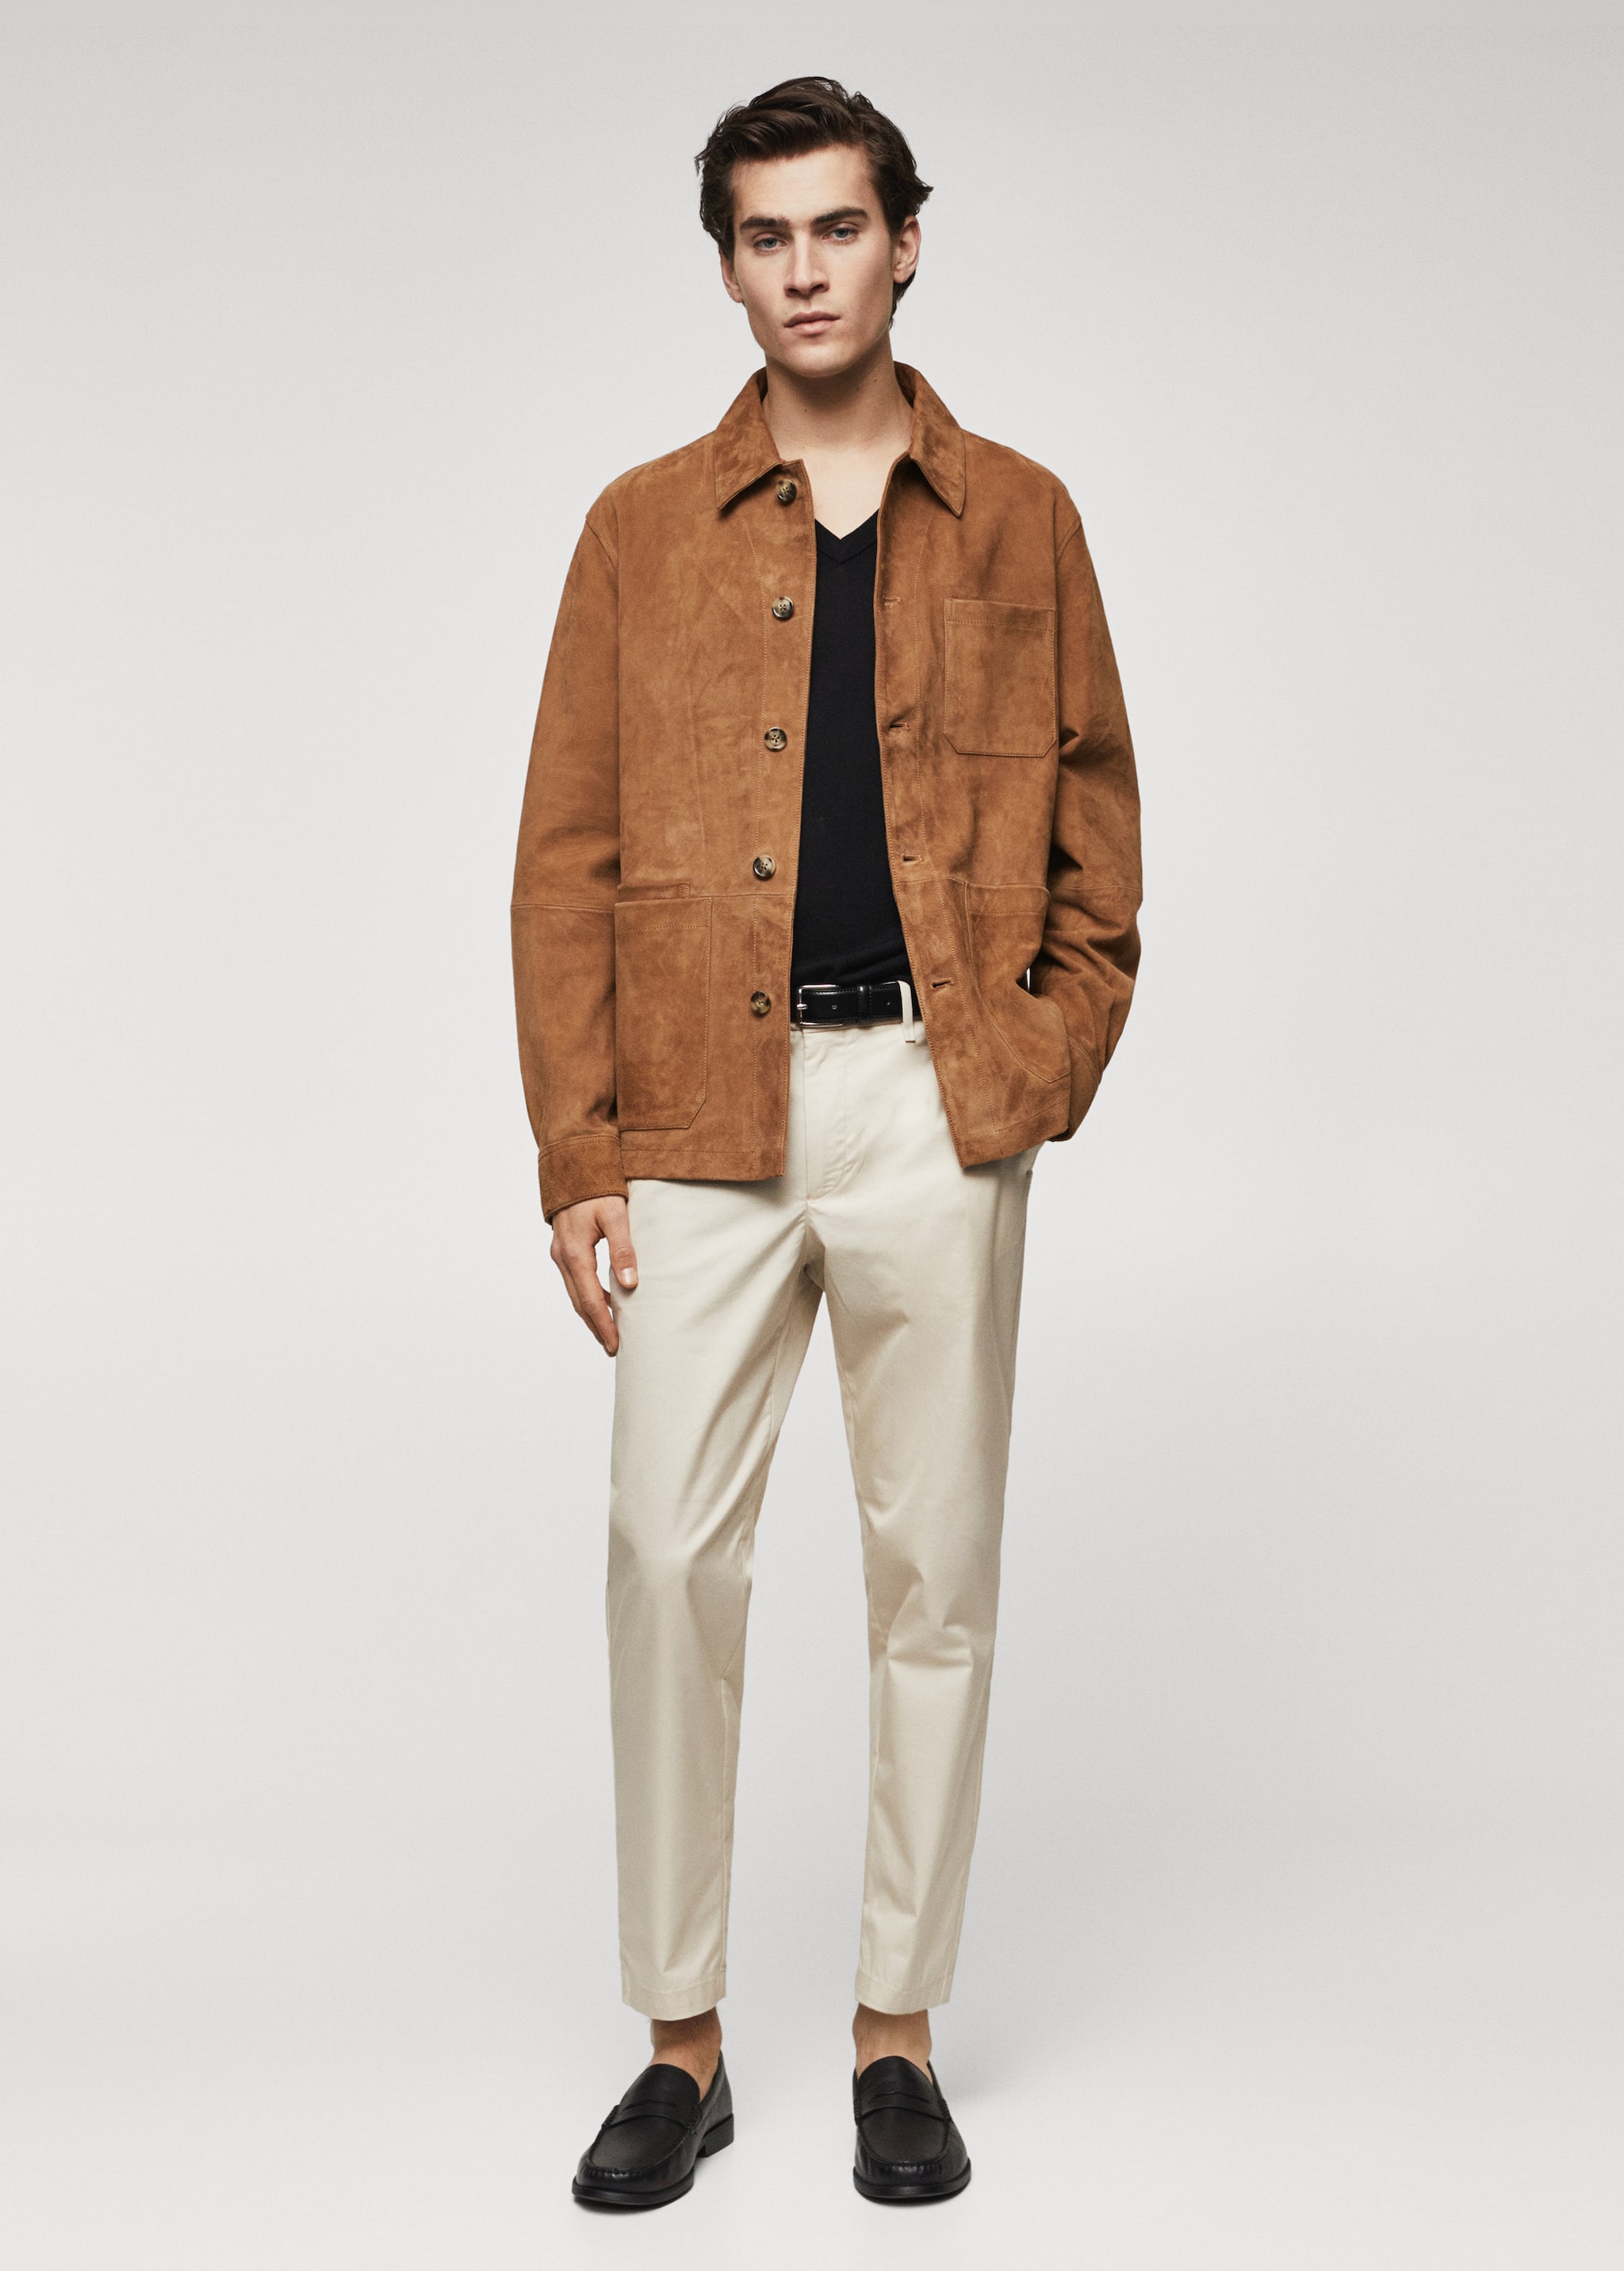 Suede overshirt with pockets - General plane